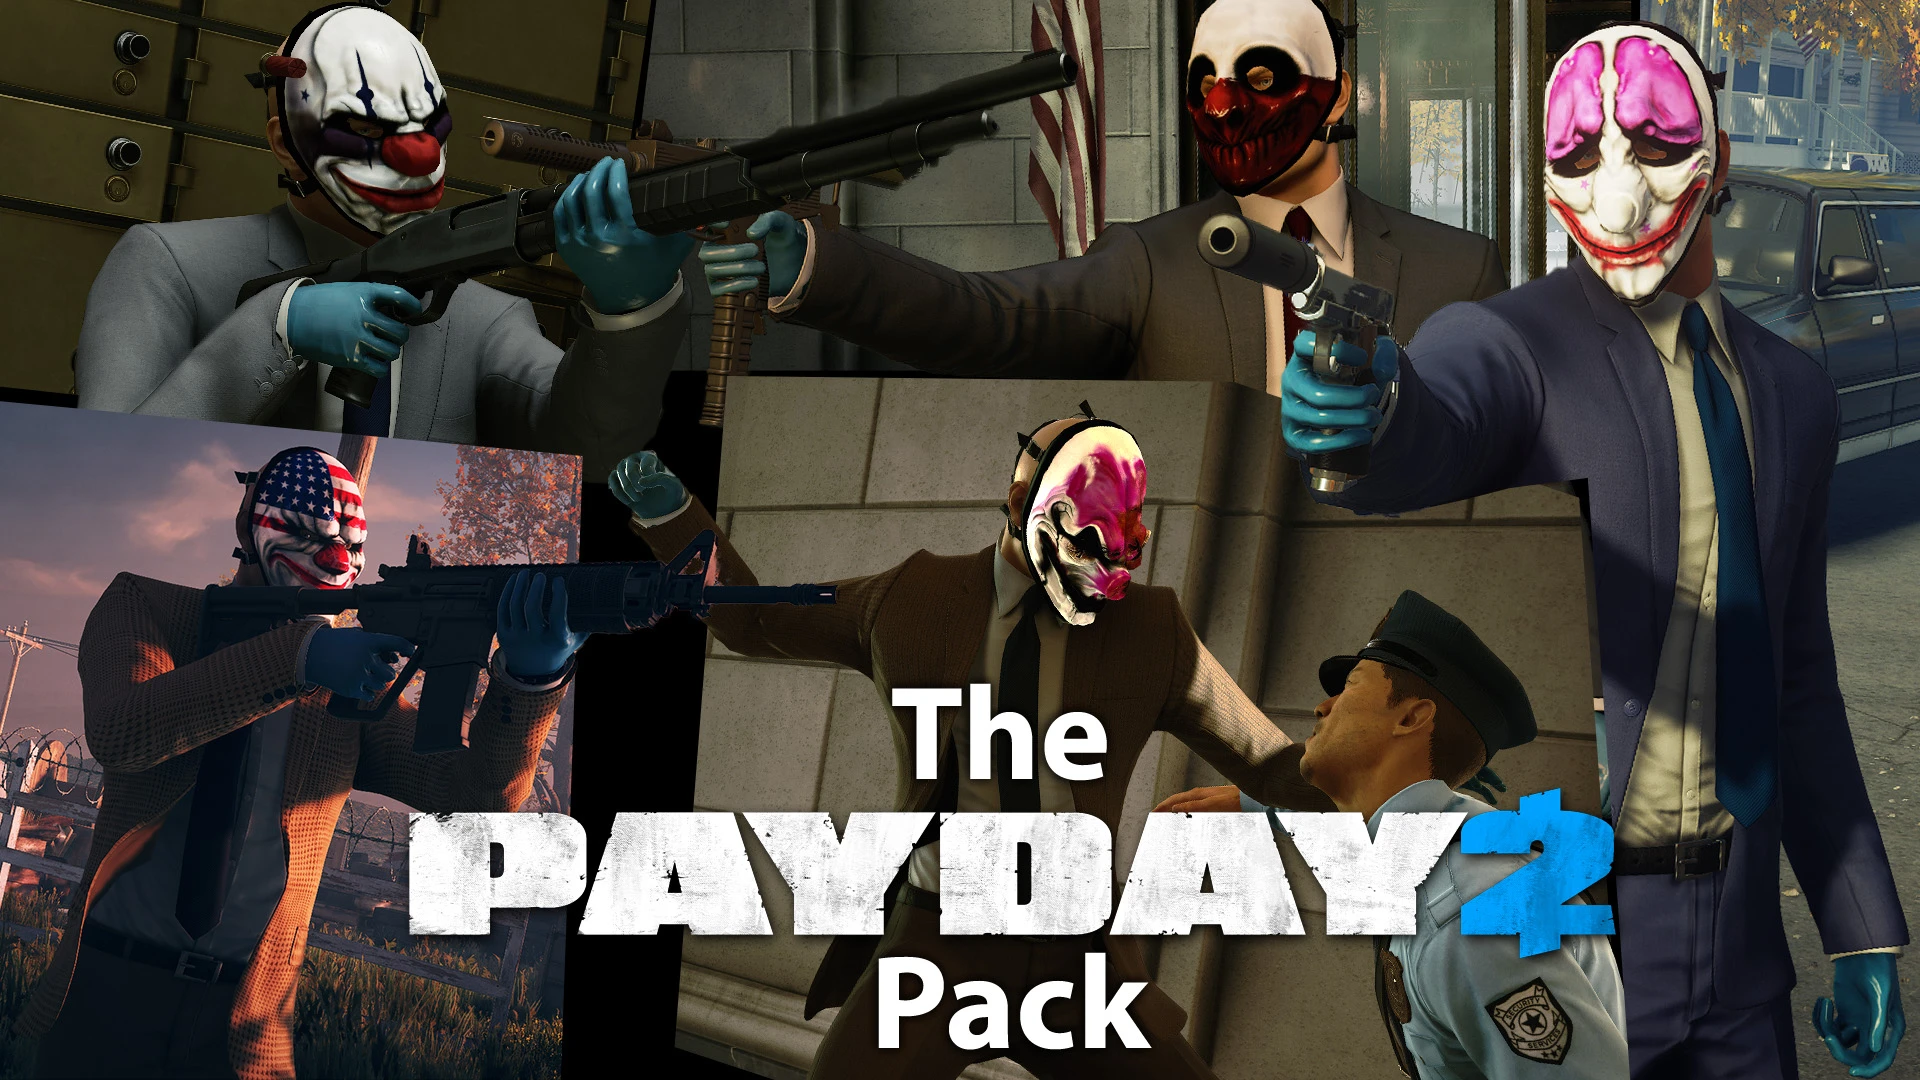 Jacket character pack payday 2 фото 75